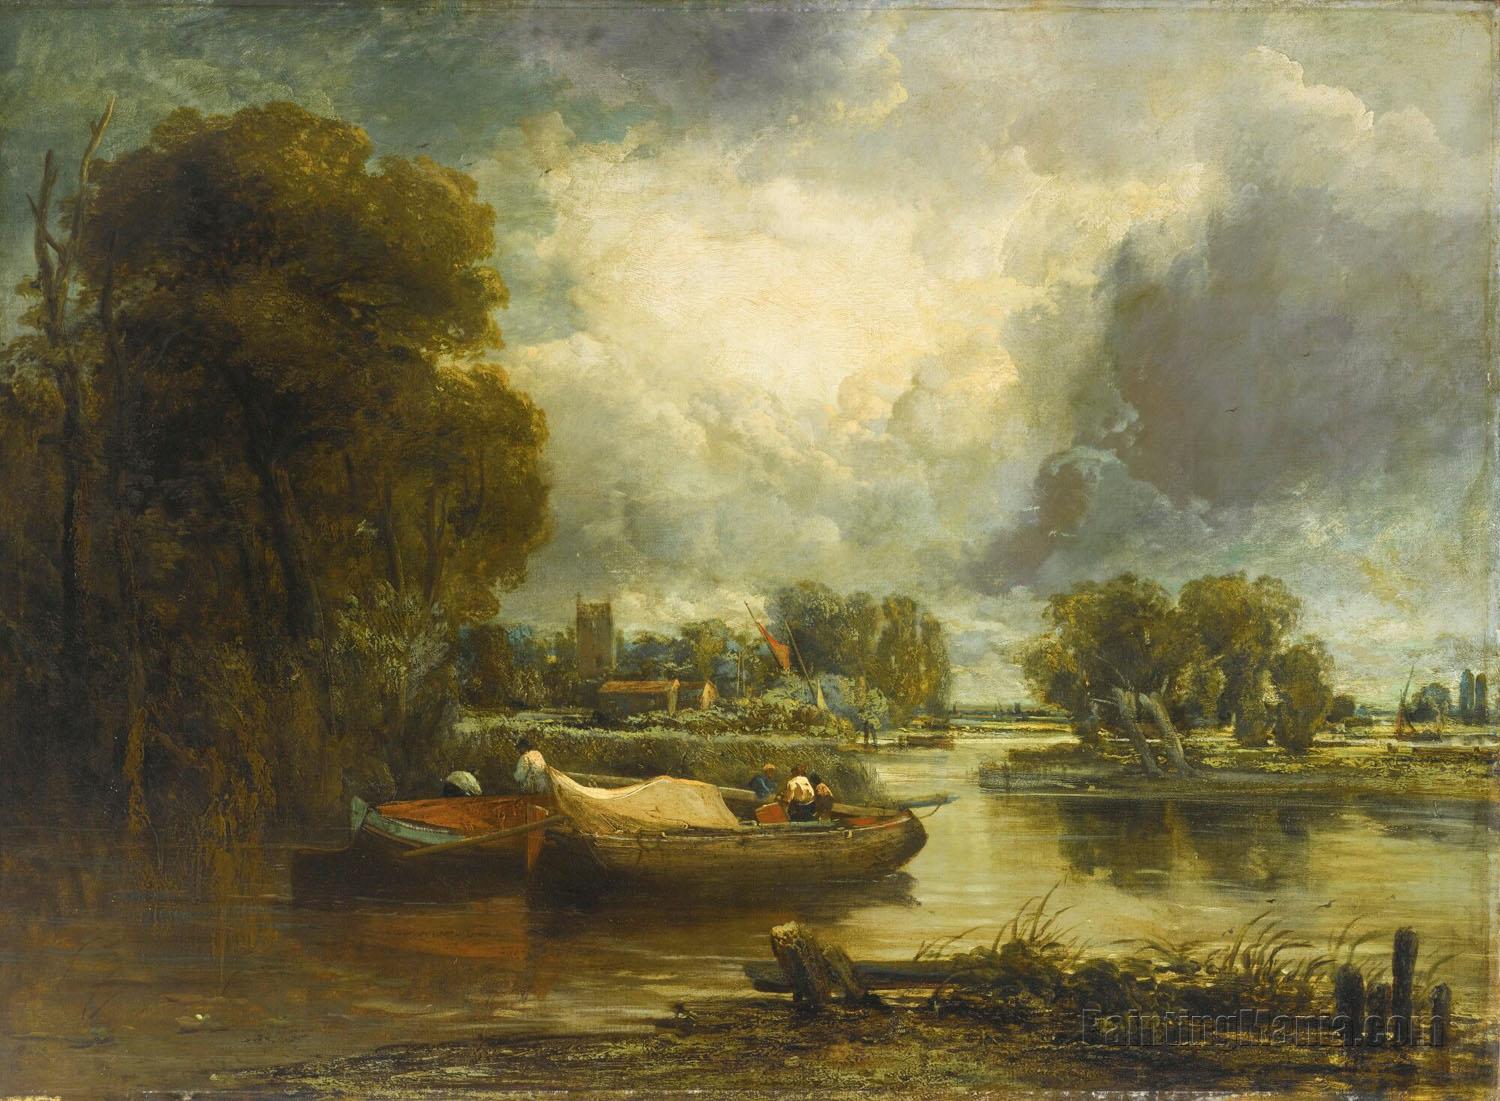 Barges on a River